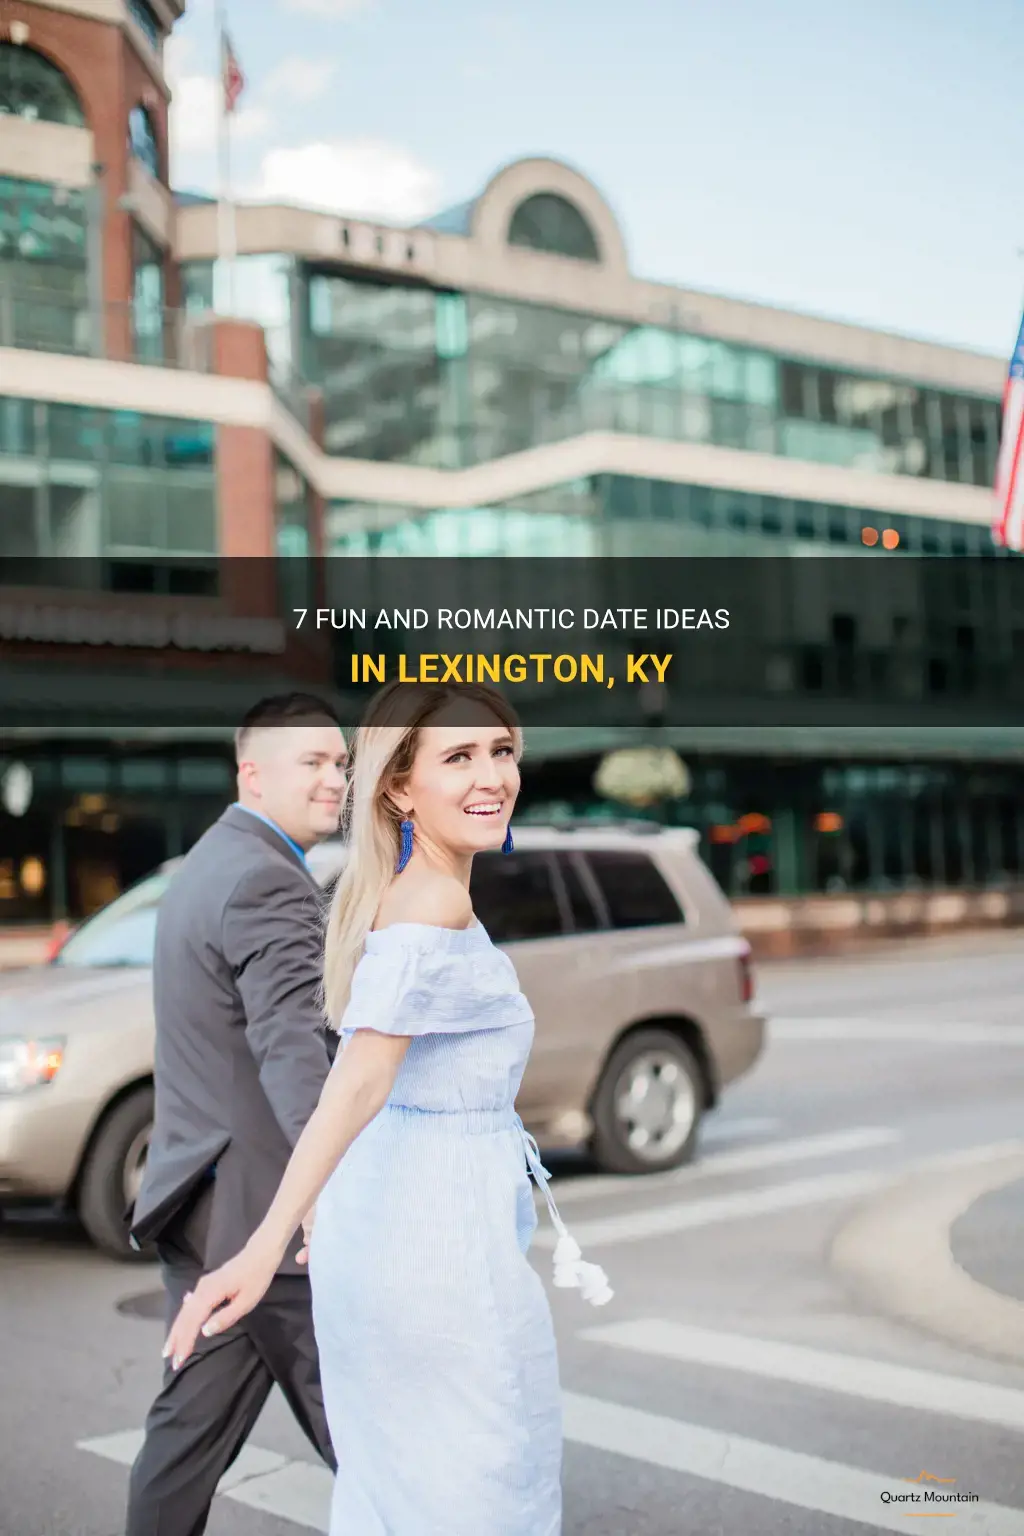 fun things to do in lexington ky on a date